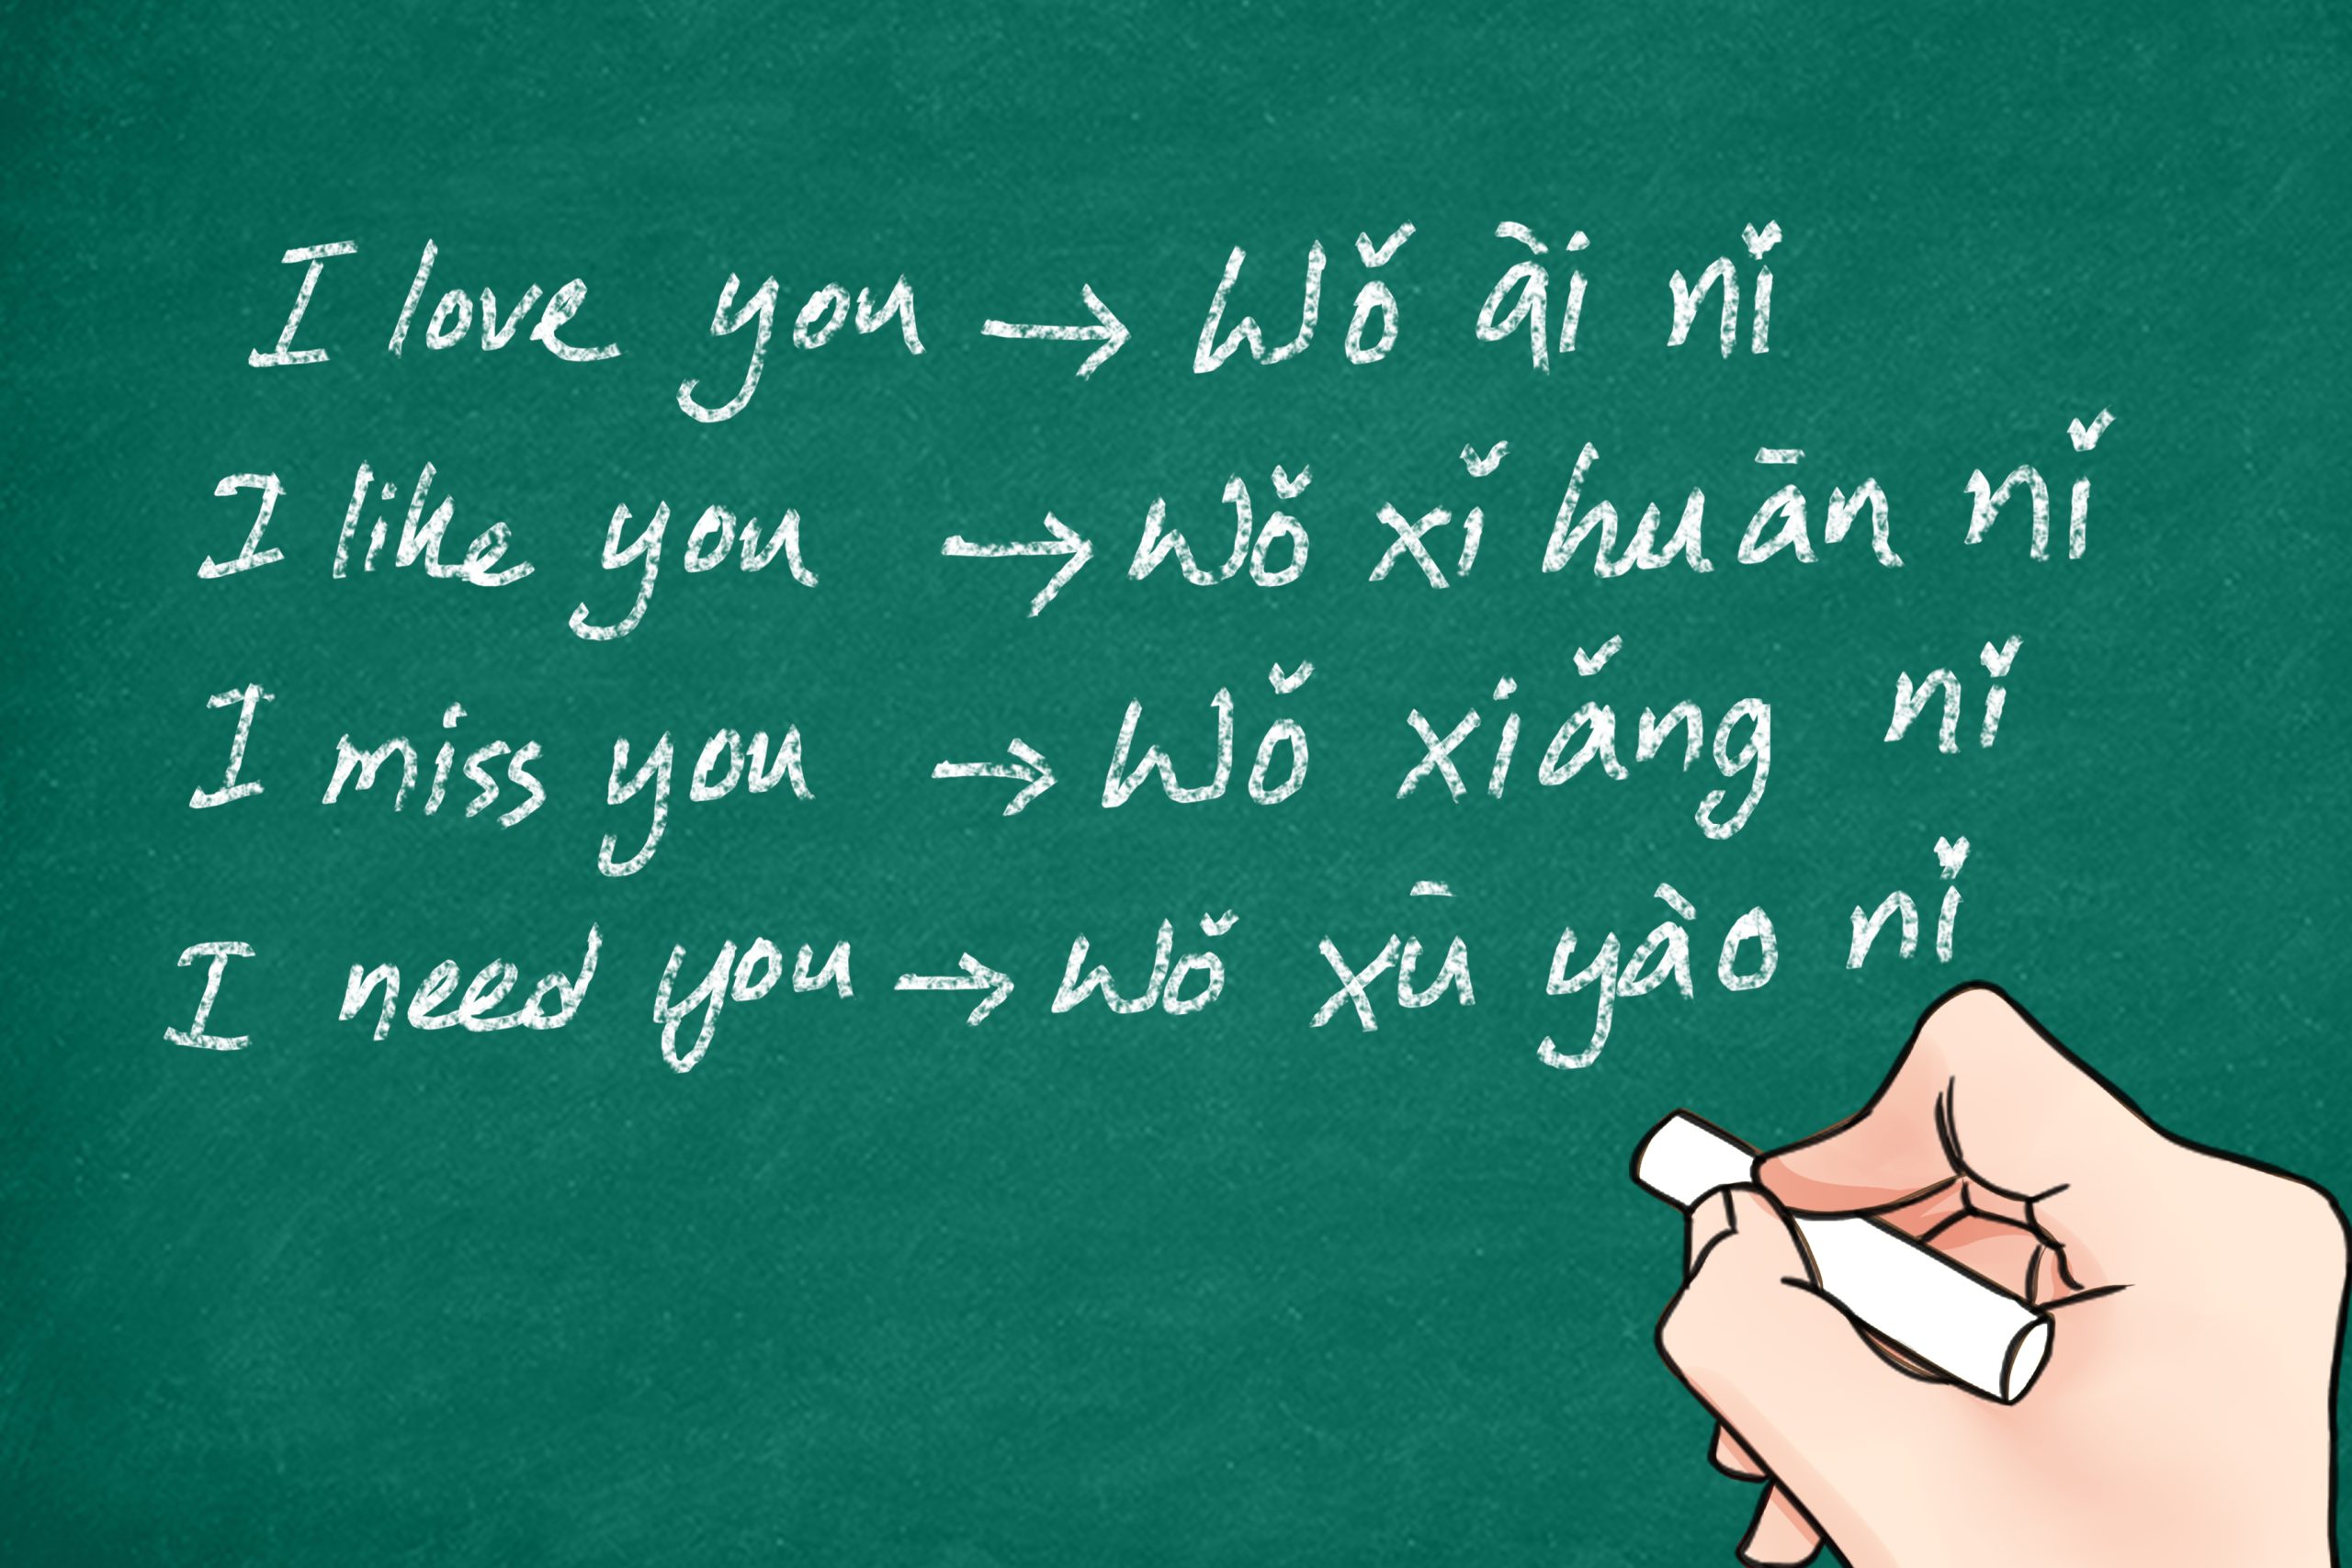 Ways to Say “I Miss You” in Chinese